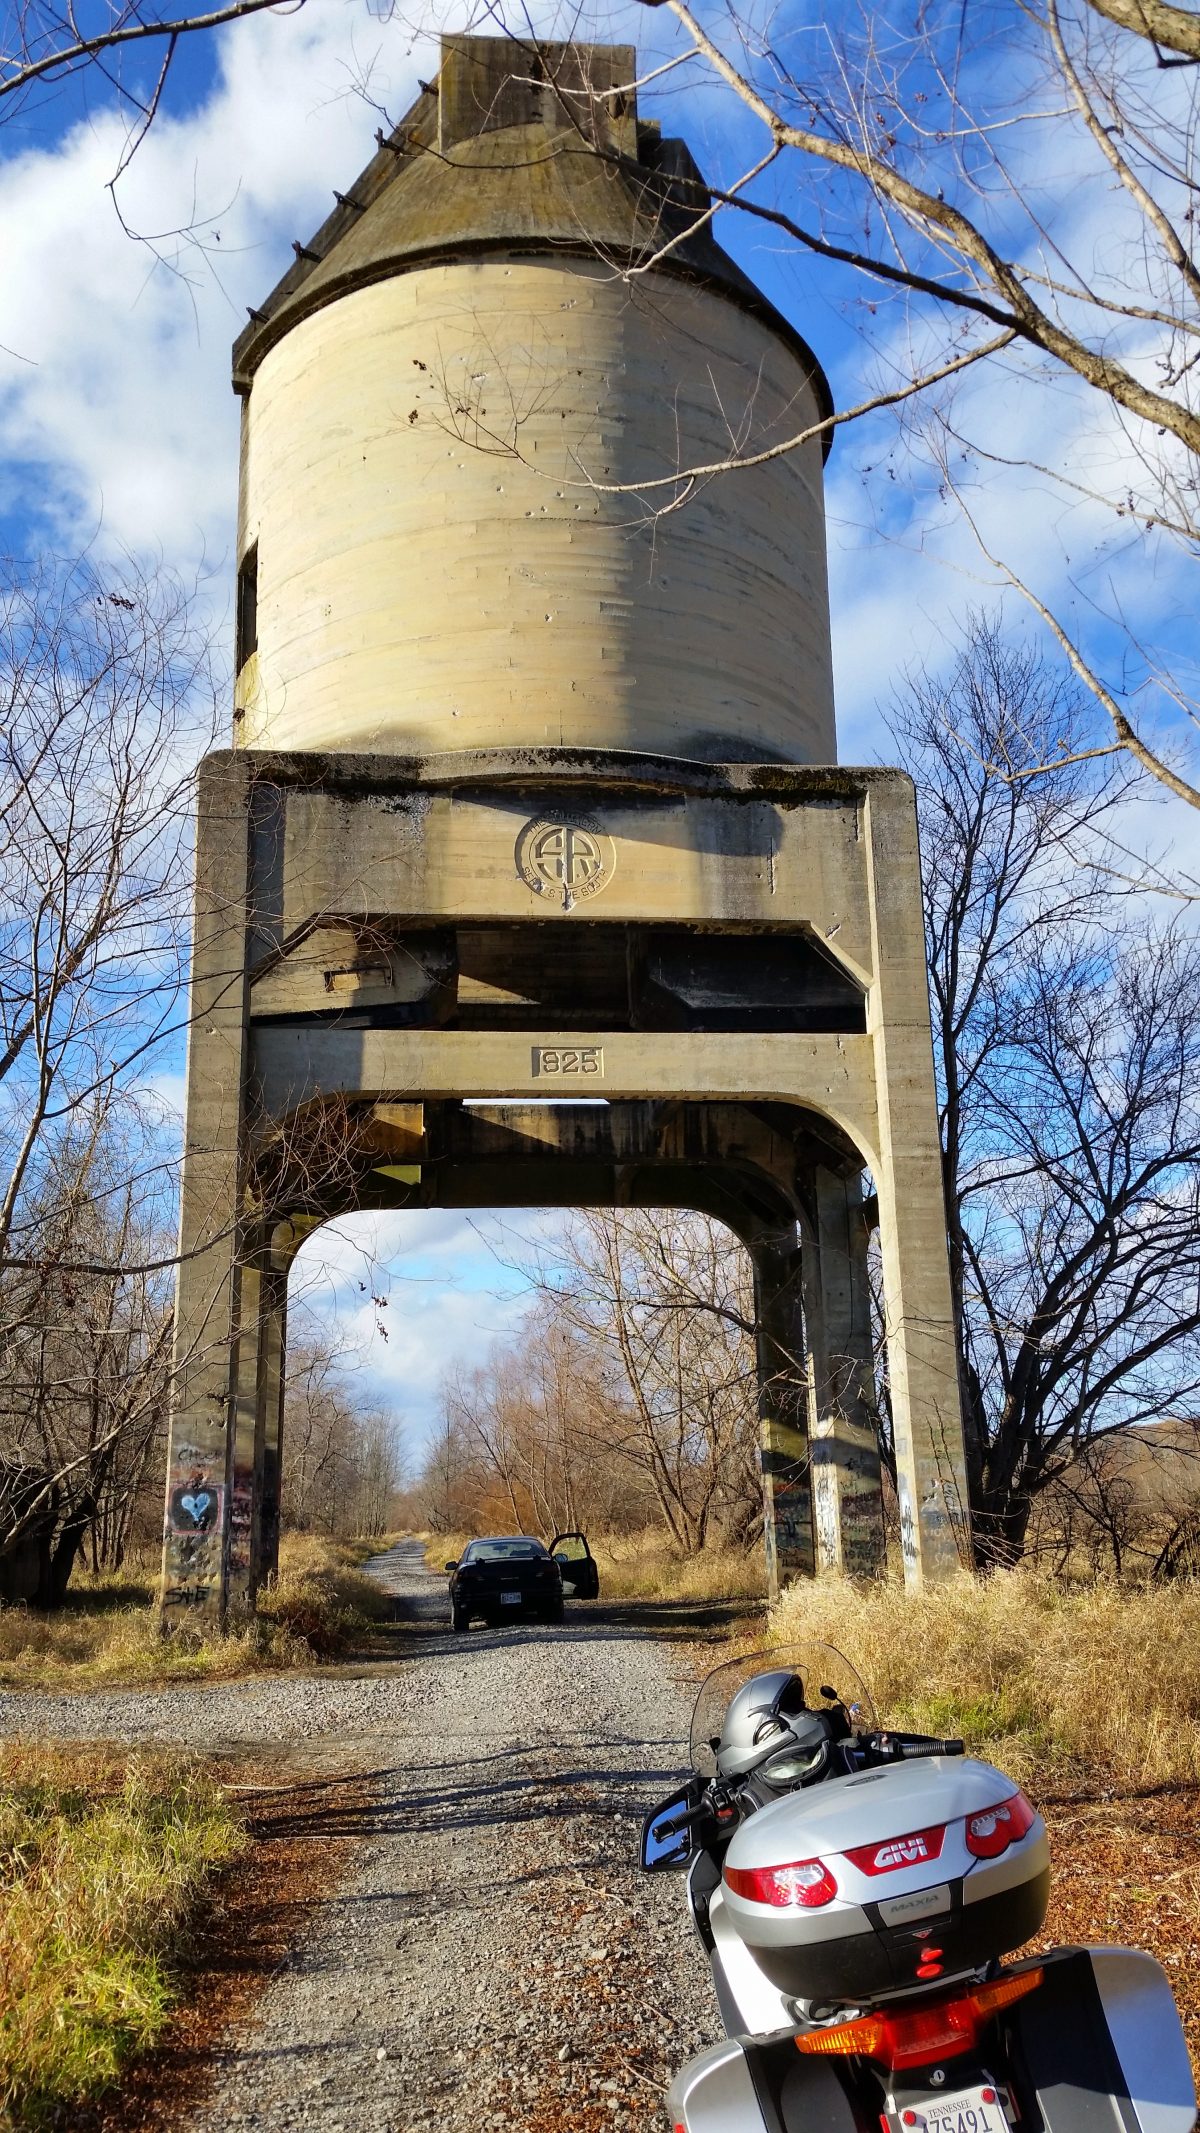 A visit to an old Coaling Tower built for steam engines